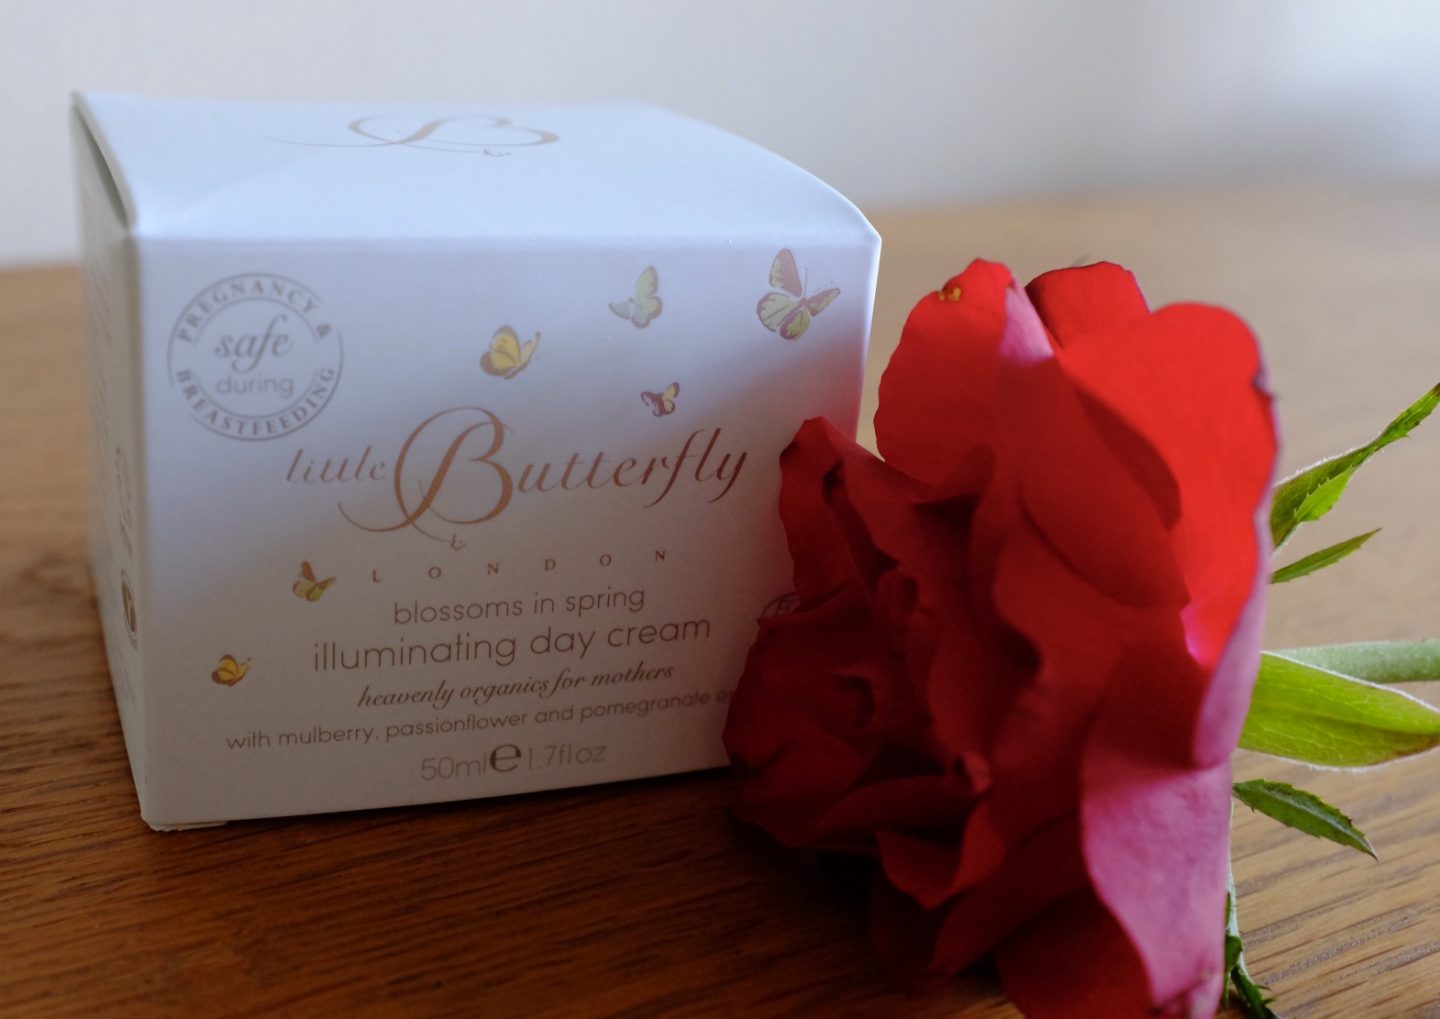 Blossoms in Spring Illuminating Day Cream from Little Butterfly